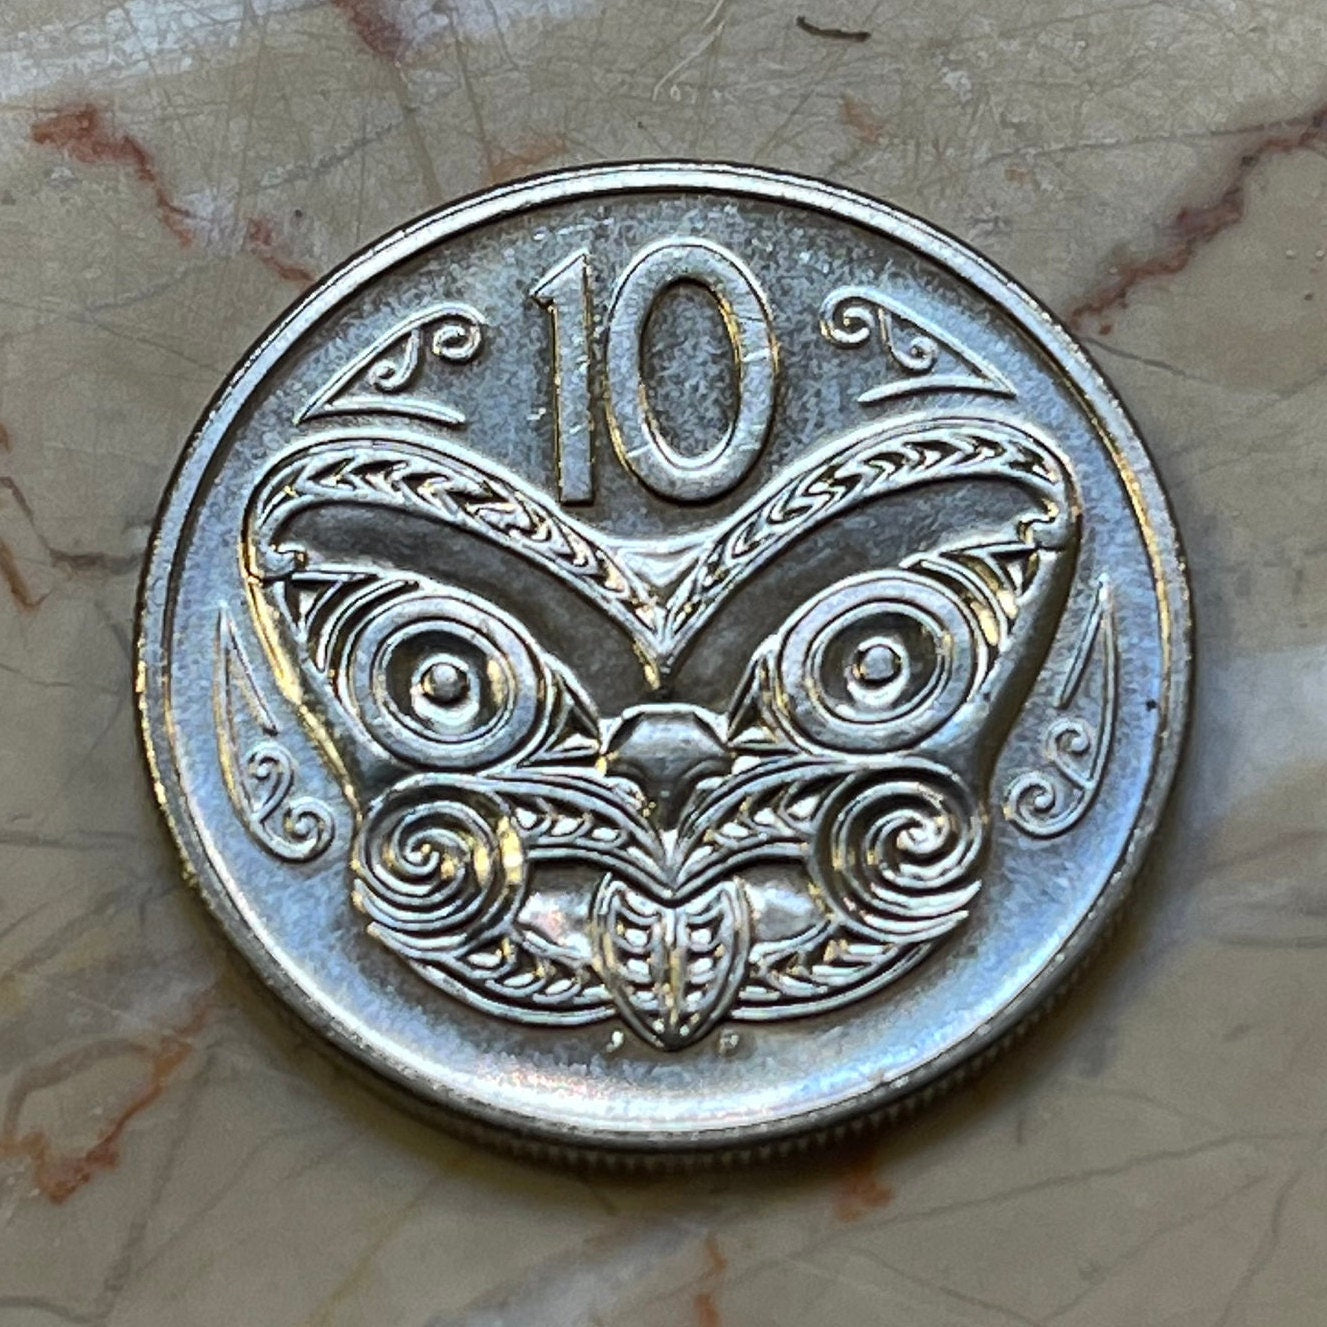 Maori Ancestor-Mask Koruru 10 Cents New Zealand Authentic Coin Money for Jewelry and Craft Making